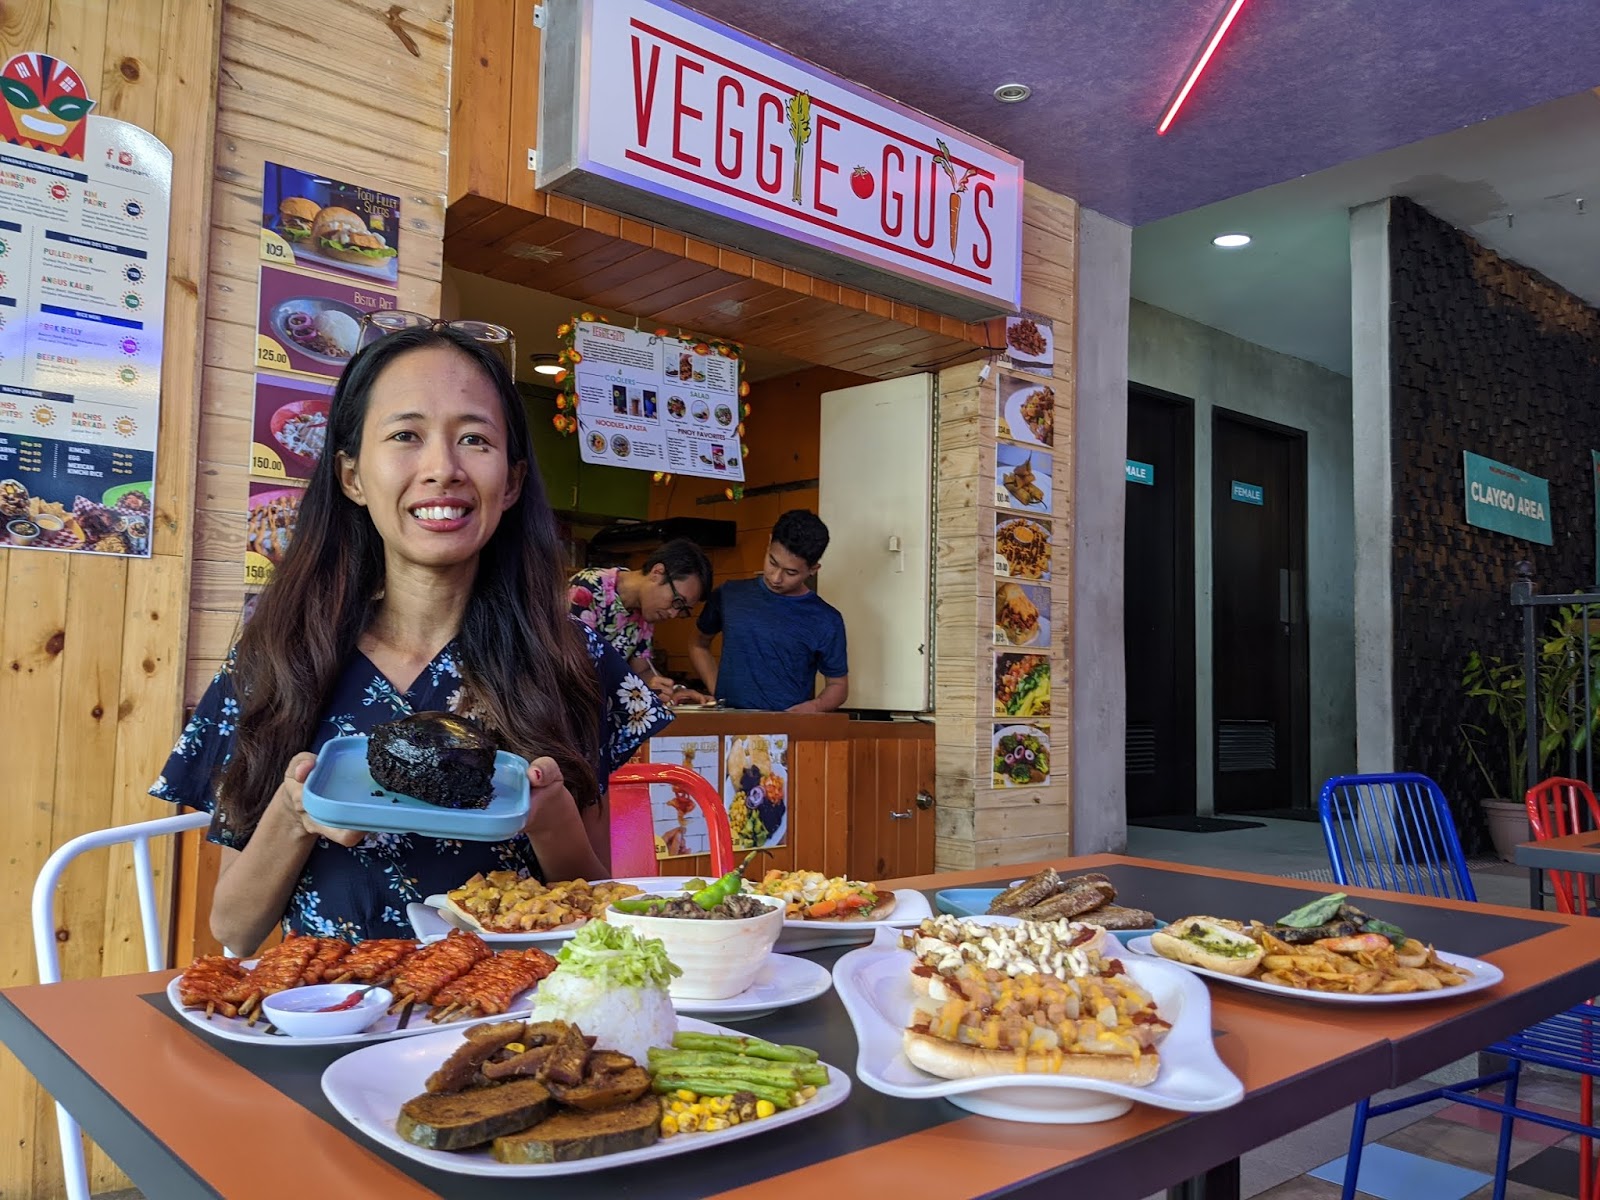 Where to eat vegan food in Quezon City: Check out Veggie Guys in